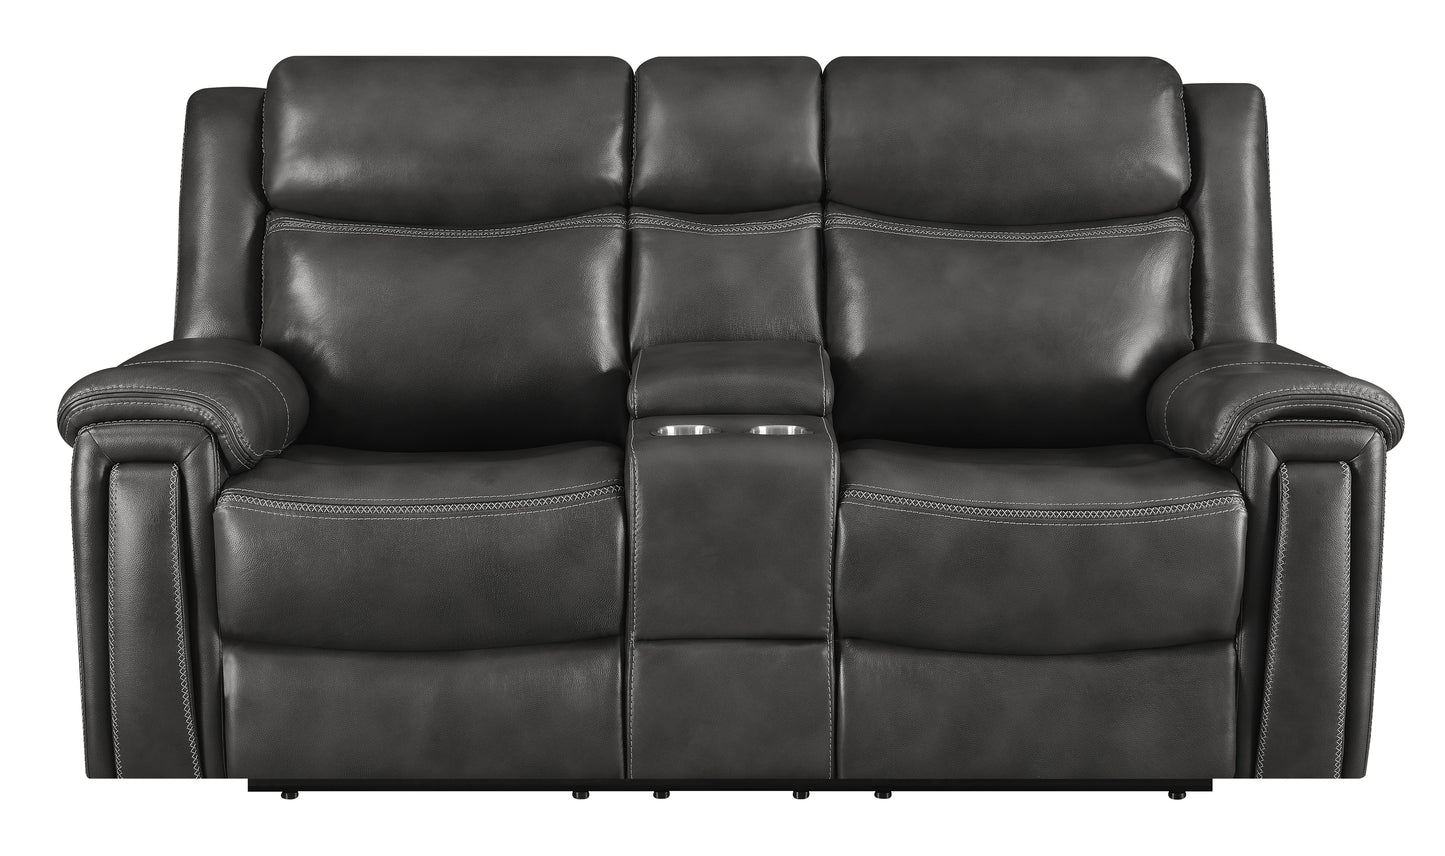 Shallowford Upholstered Power^2 Loveseat with Console Hand Rubbed Charcoal